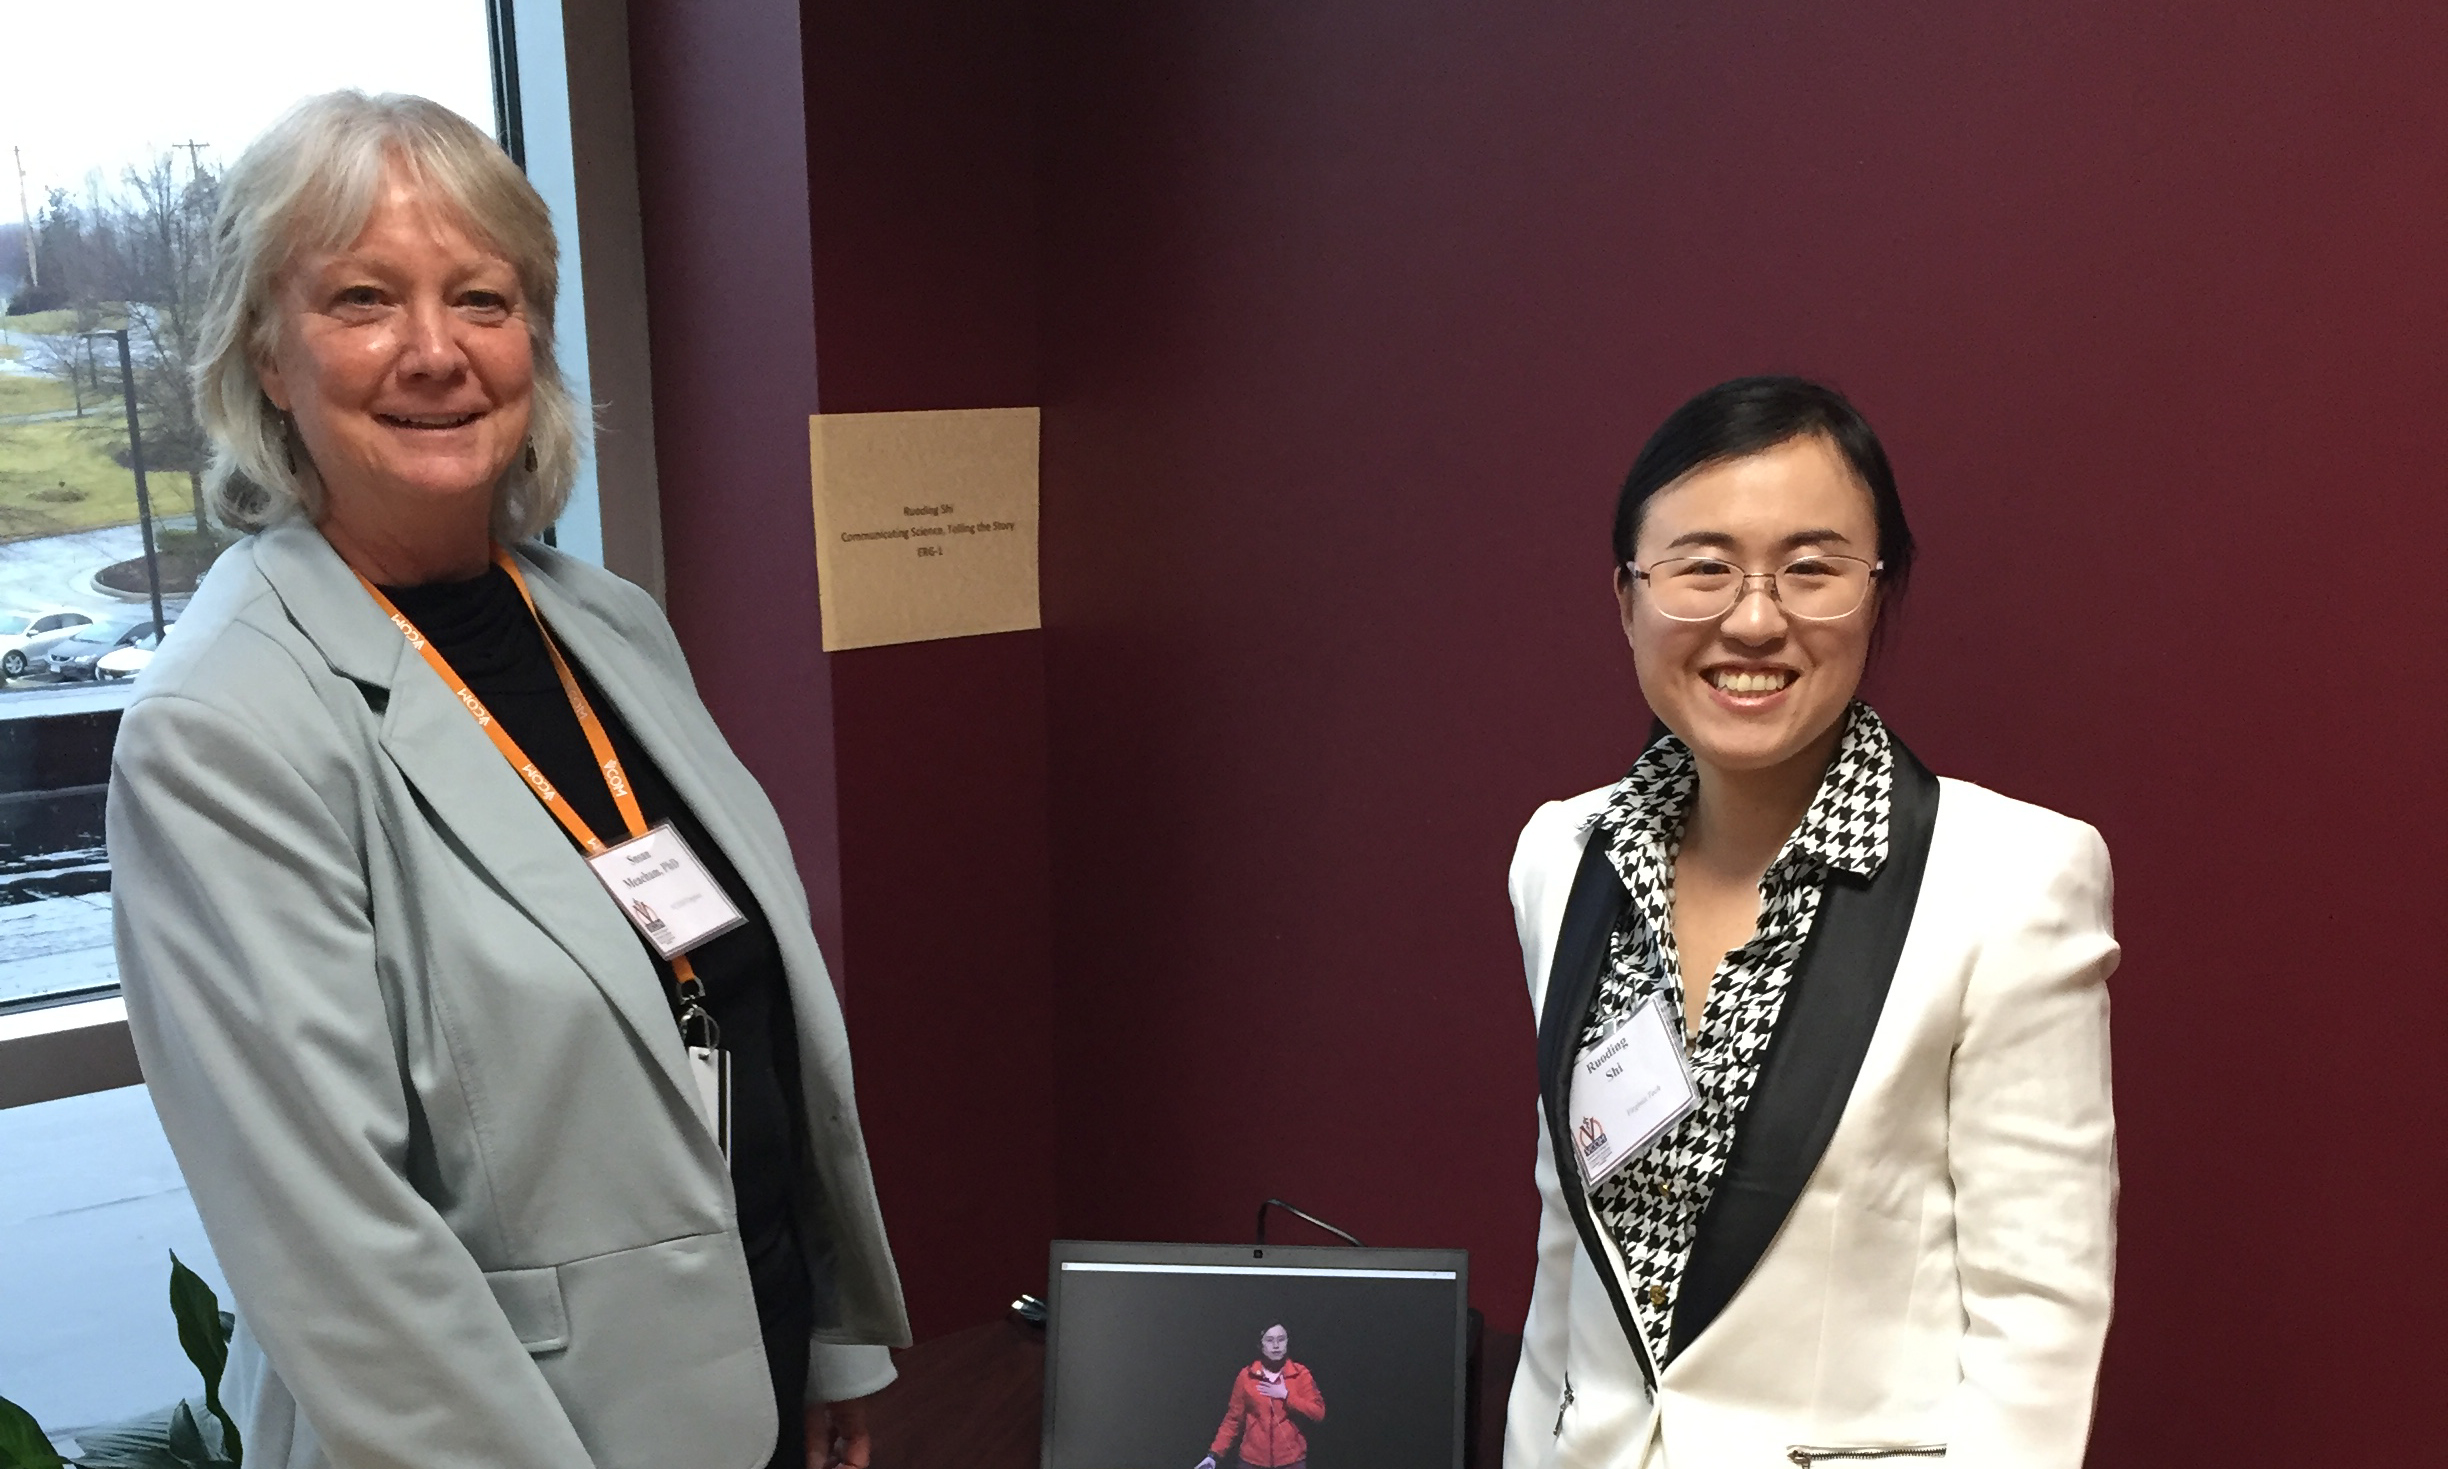 This photo shows two women standing in front of a dark maroon wall and on either side of a laptop screen. On the left is a a white woman with gray hair. On the right is a younger Asian woman with black hair. Both are professionally dressed, smiling, and wearing name tags.